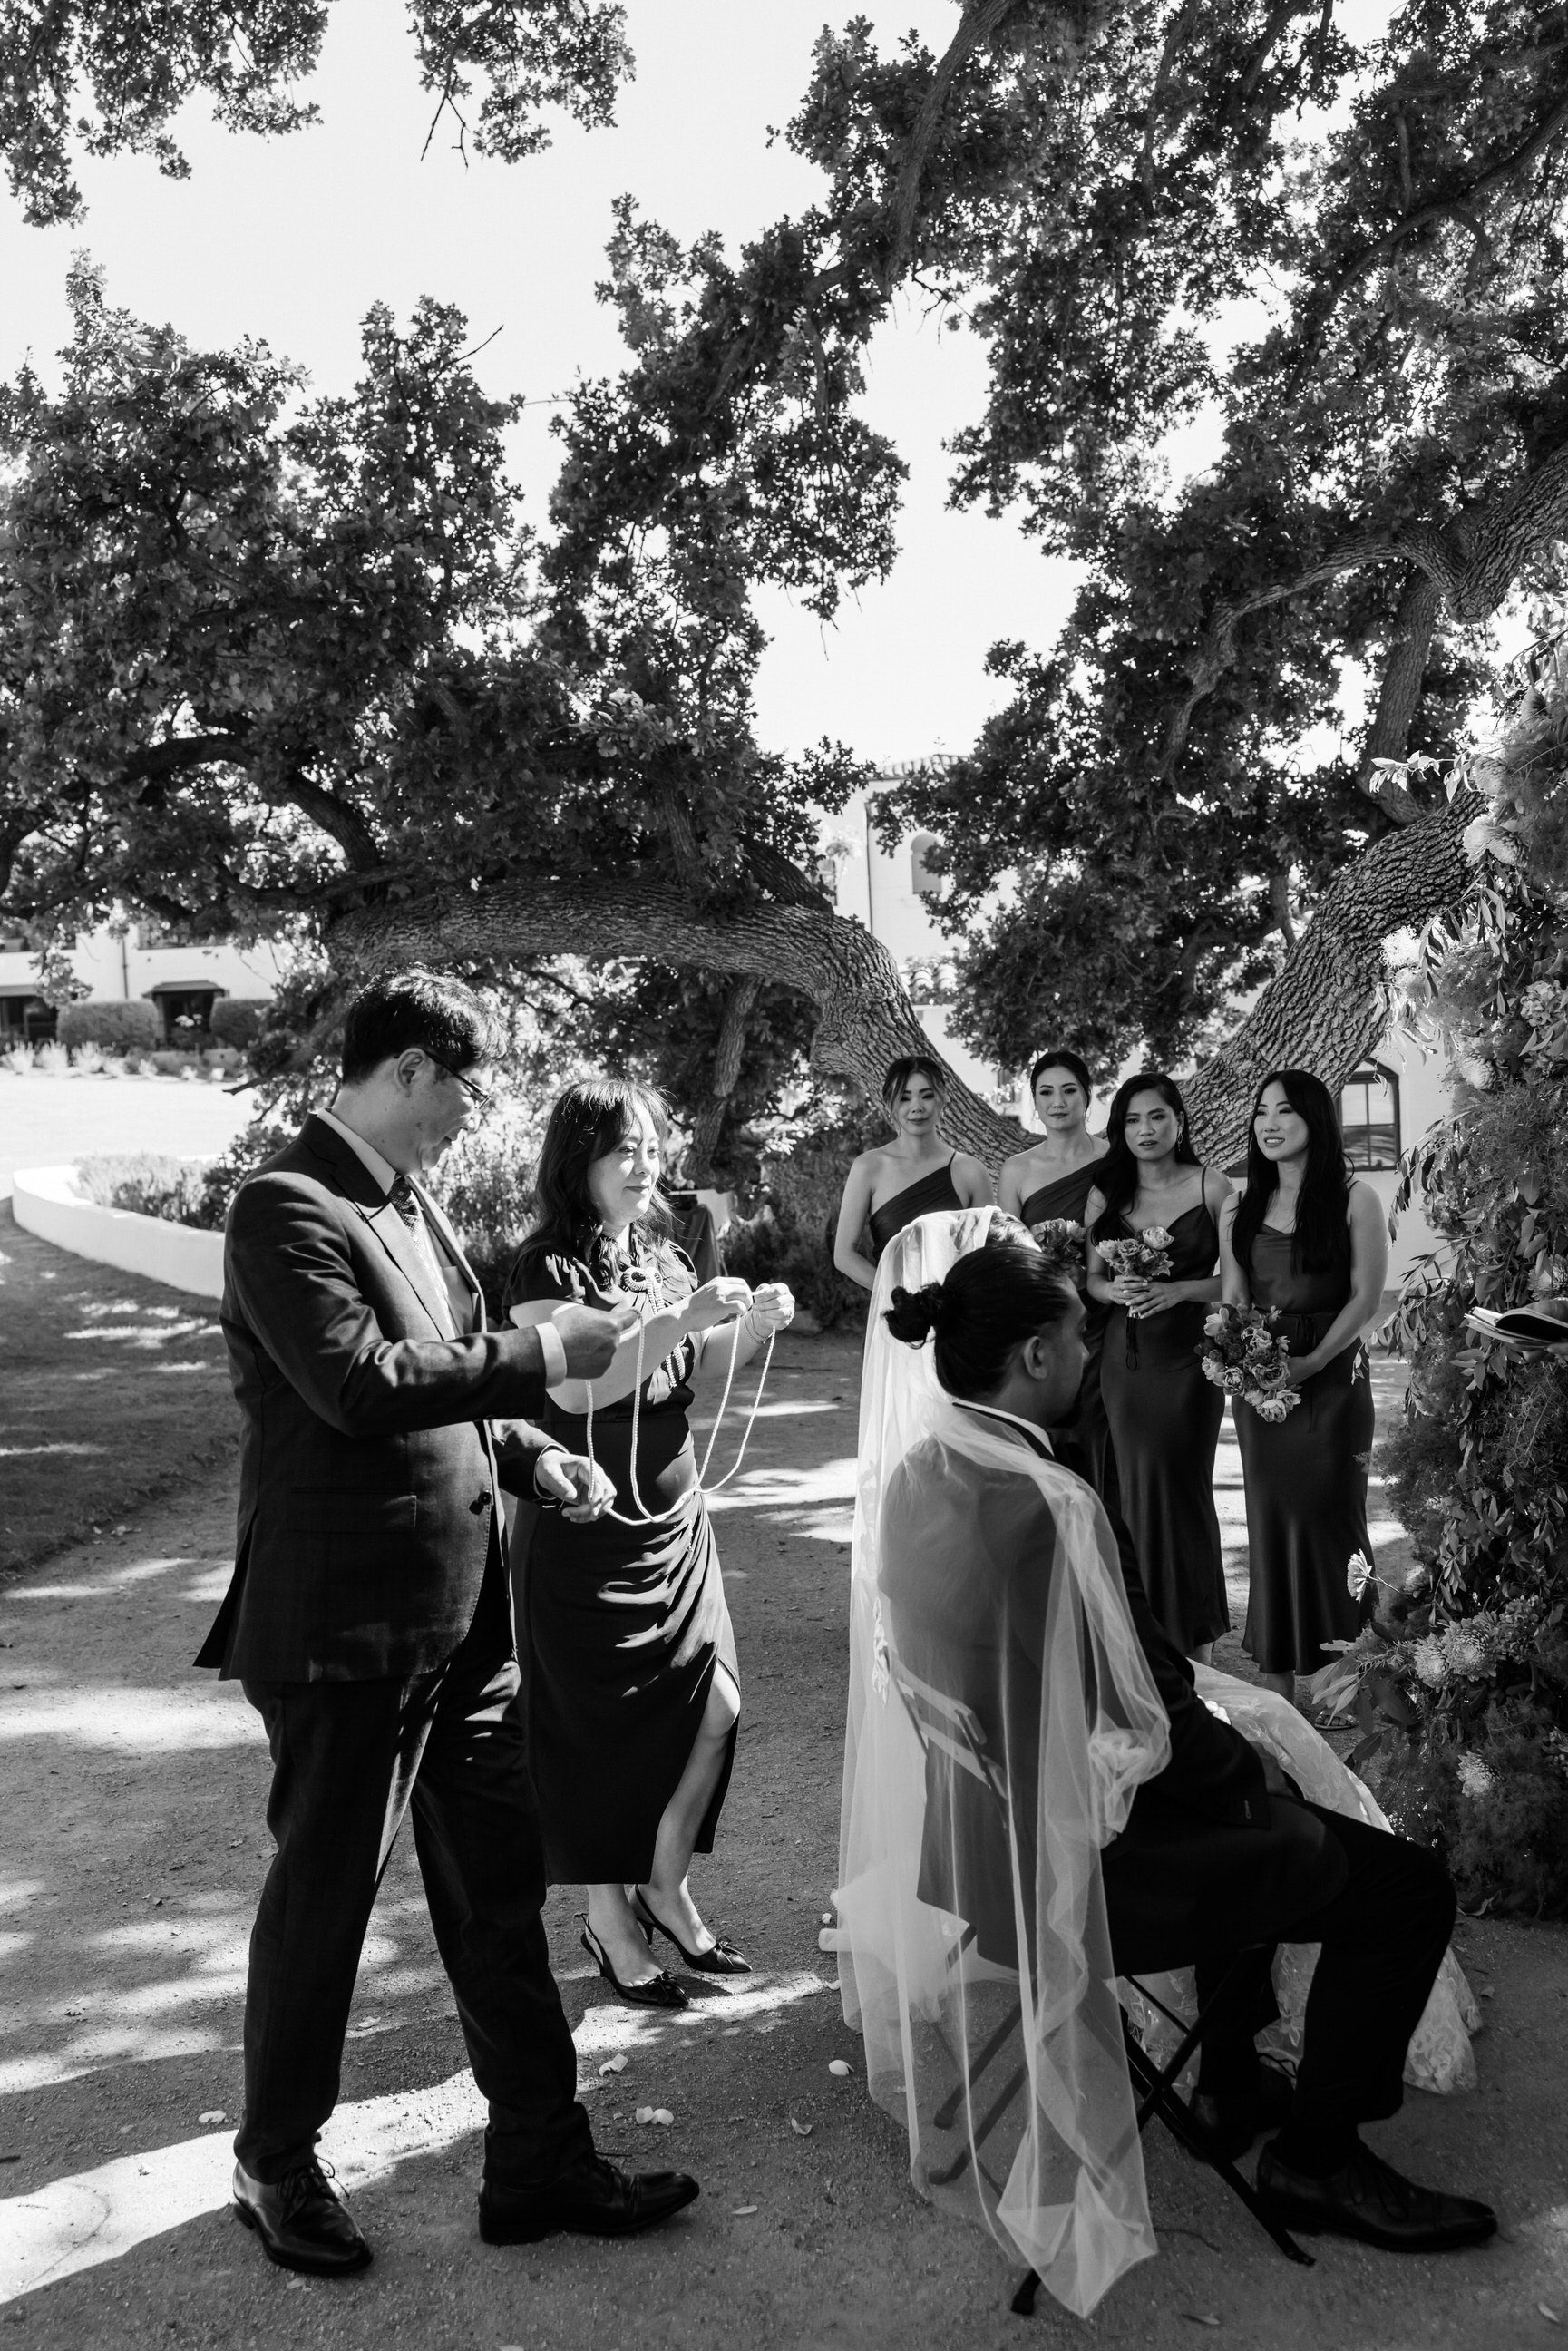 outdoor wedding with unity ceremony and mother of bride placing cords over couples shoulders